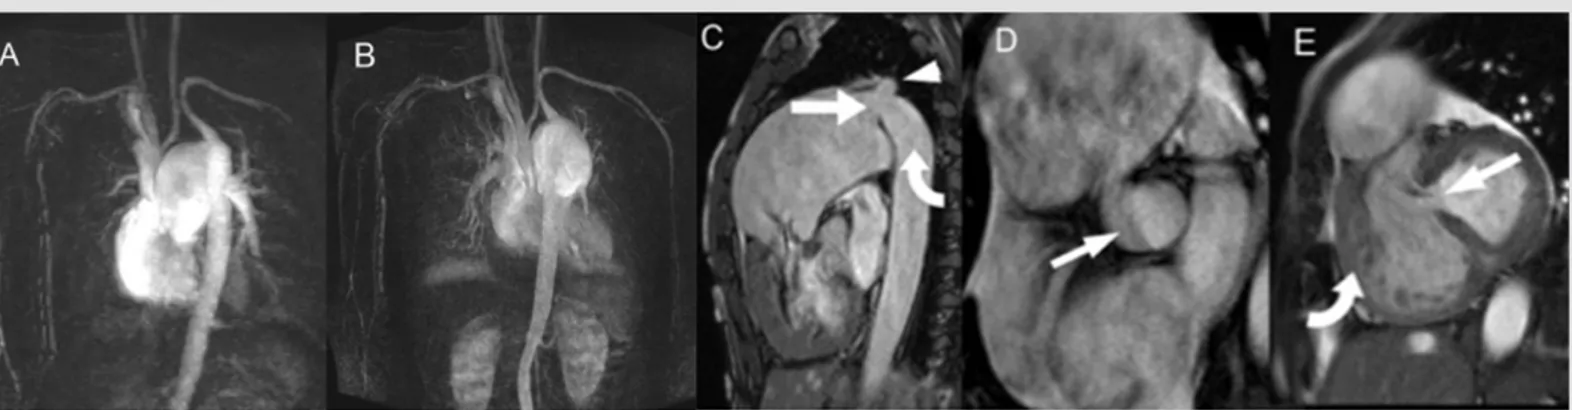 Figure 3. Magnetic resonance imaging (MRI). (A) and (B) Contrast-enhanced magnetic resonance angiography (MRA) with subtraction showing aortic interruption and an enlarged  pulmonary artery supplying the left subclavian artery and descending aorta via a pa